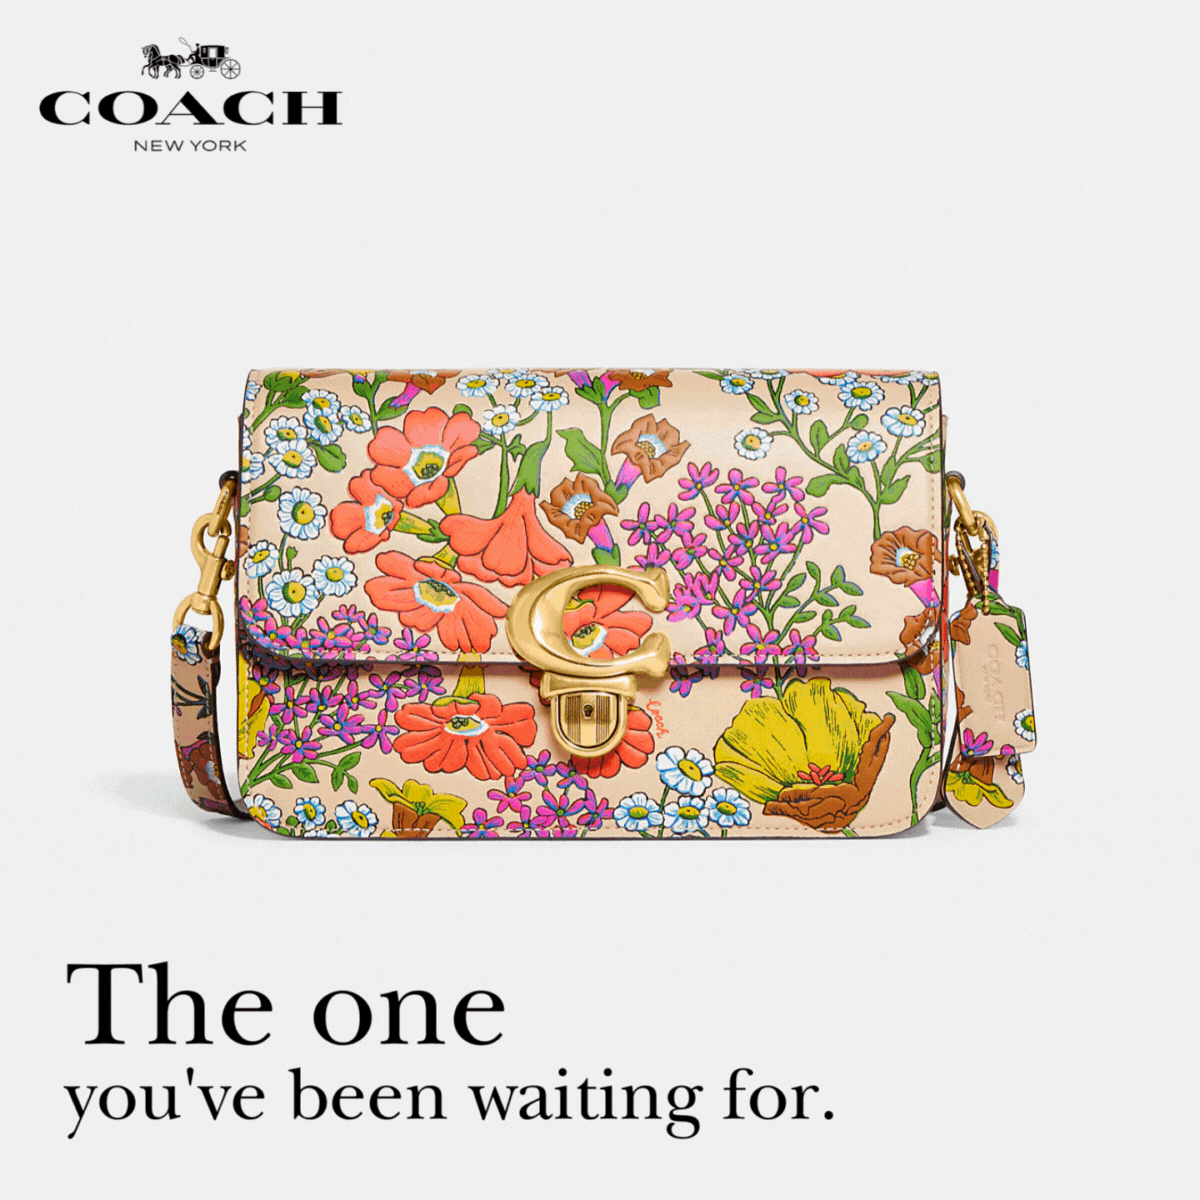 Floral print Coach purse sitting on white background